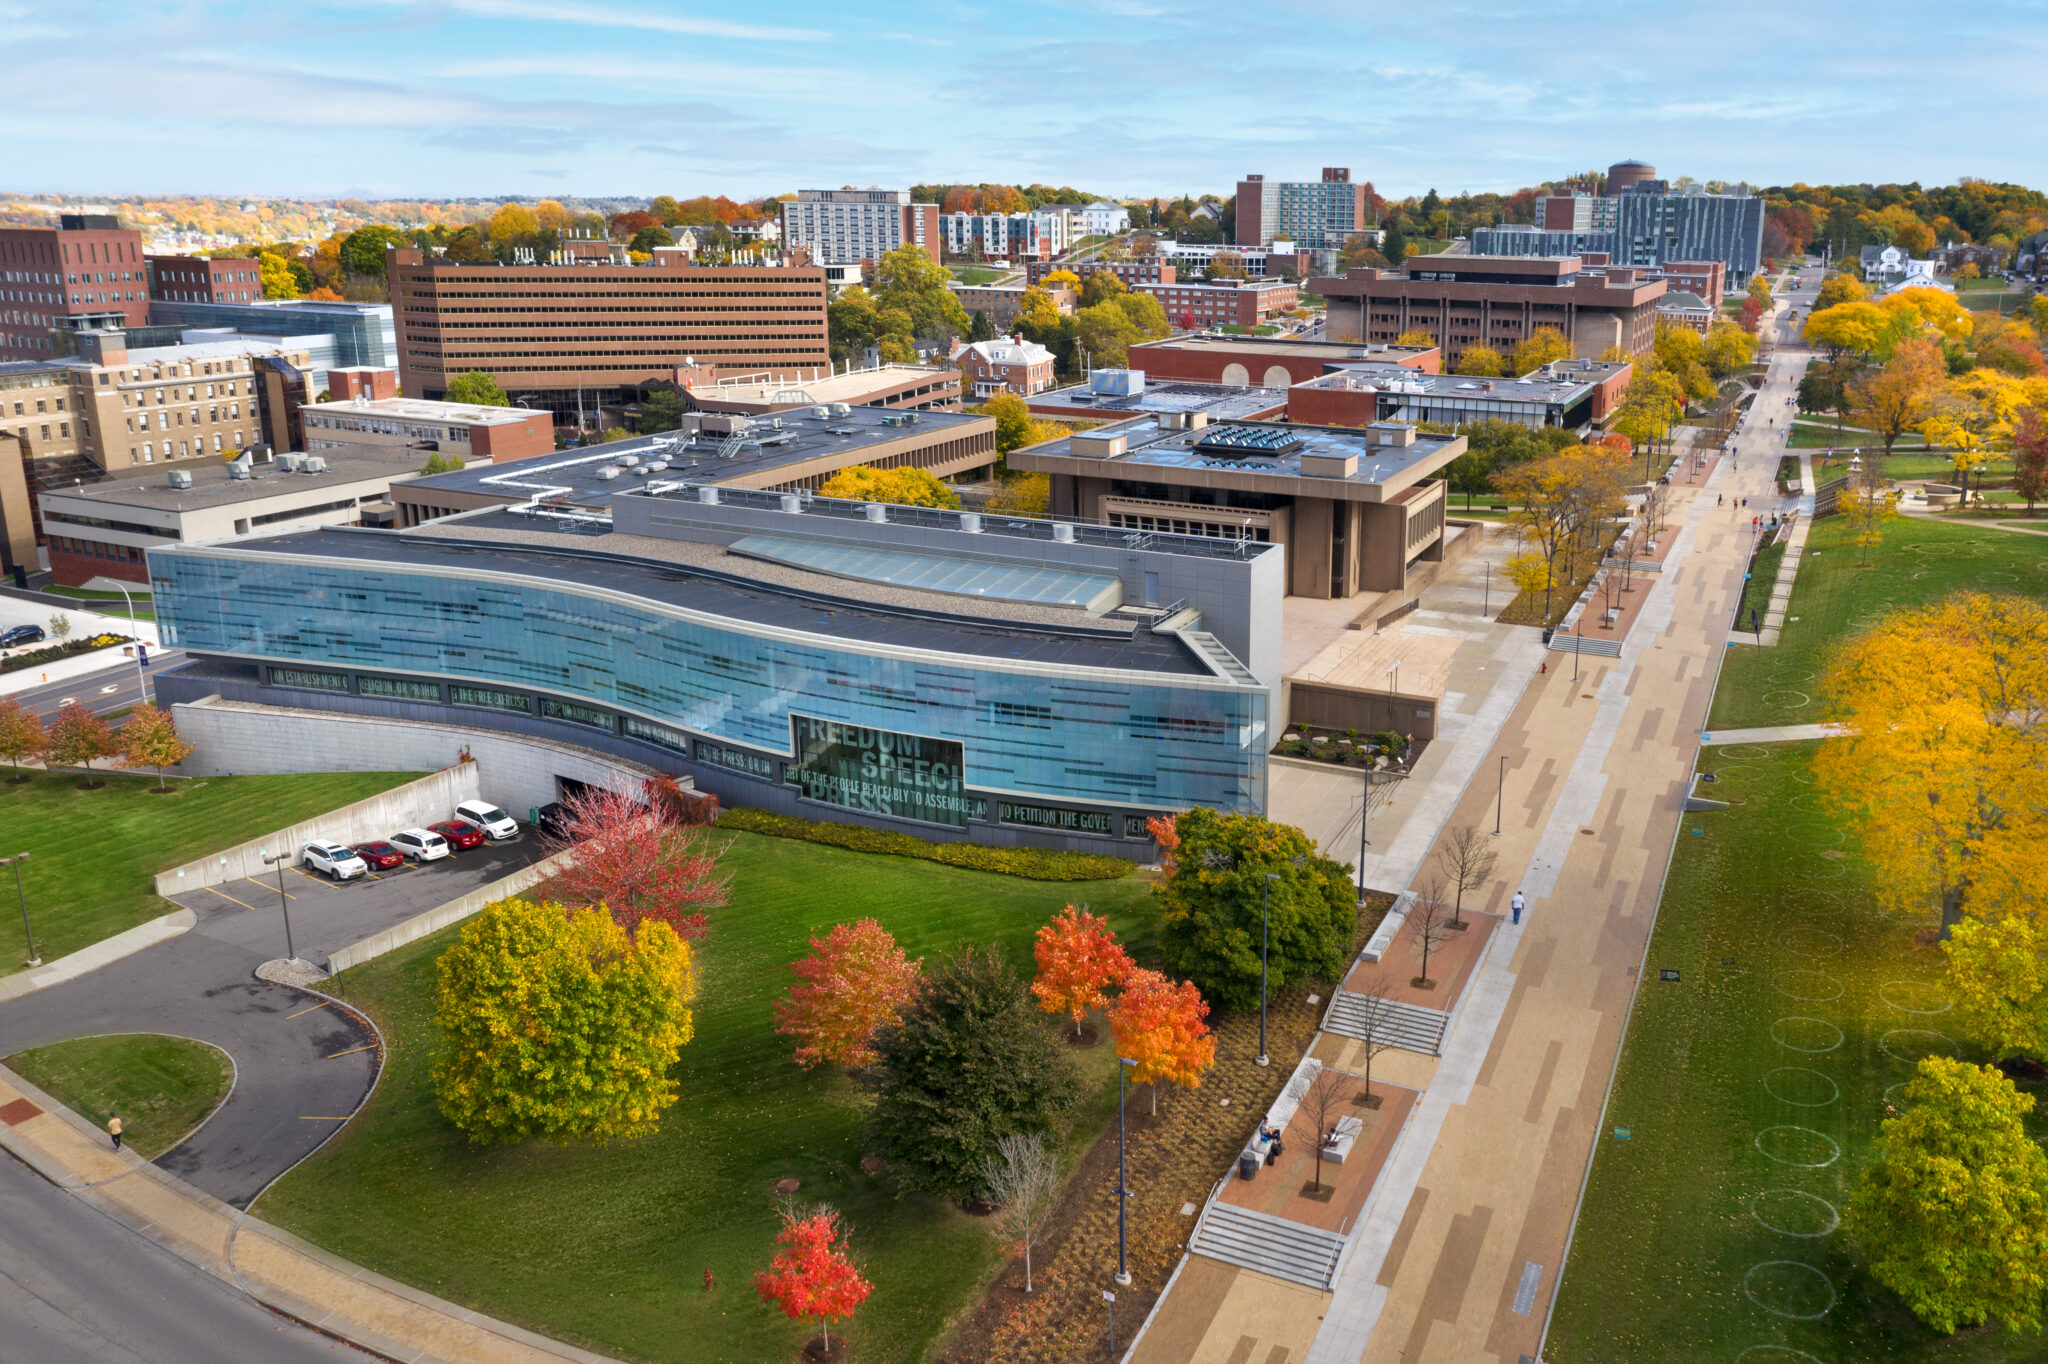 An overhead view of the Newhouse School complex